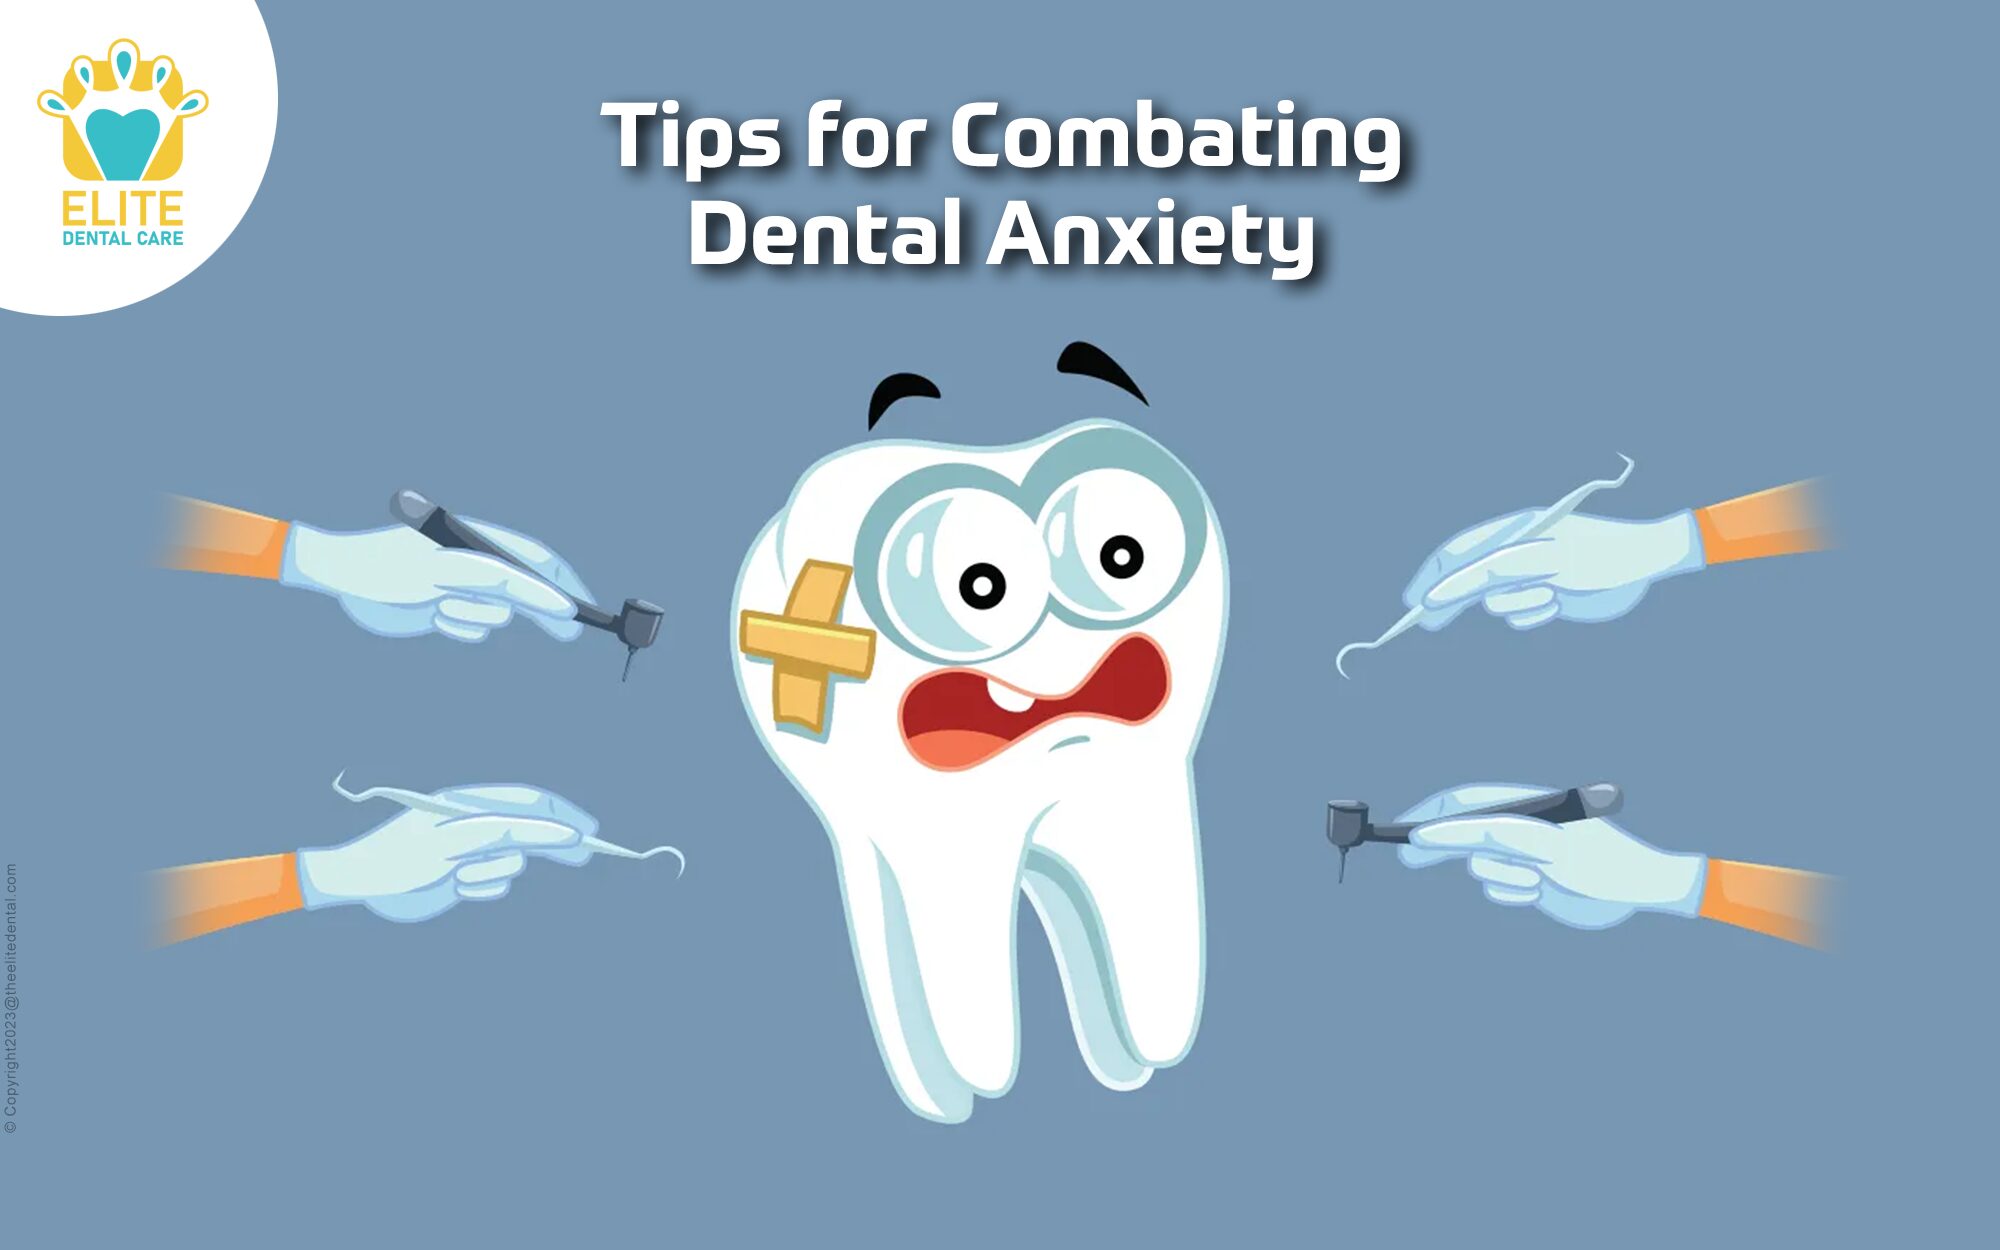 TIPS FOR COMBATING DENTAL ANXIETY